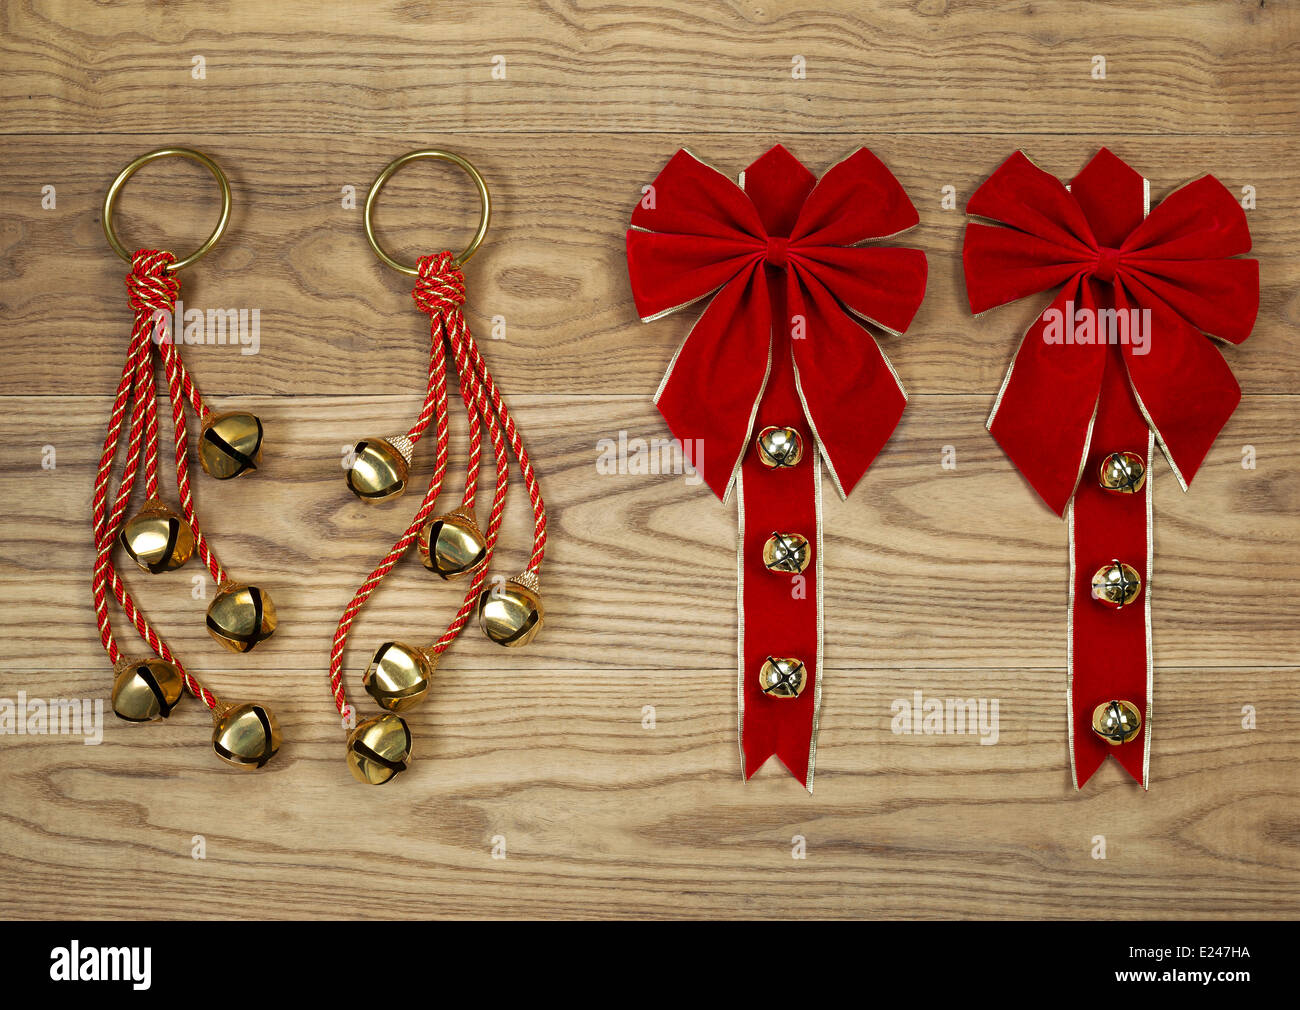 Overhead view of Christmas red bows and rope with golden bells positioned on rustic wooden boards. Stock Photo